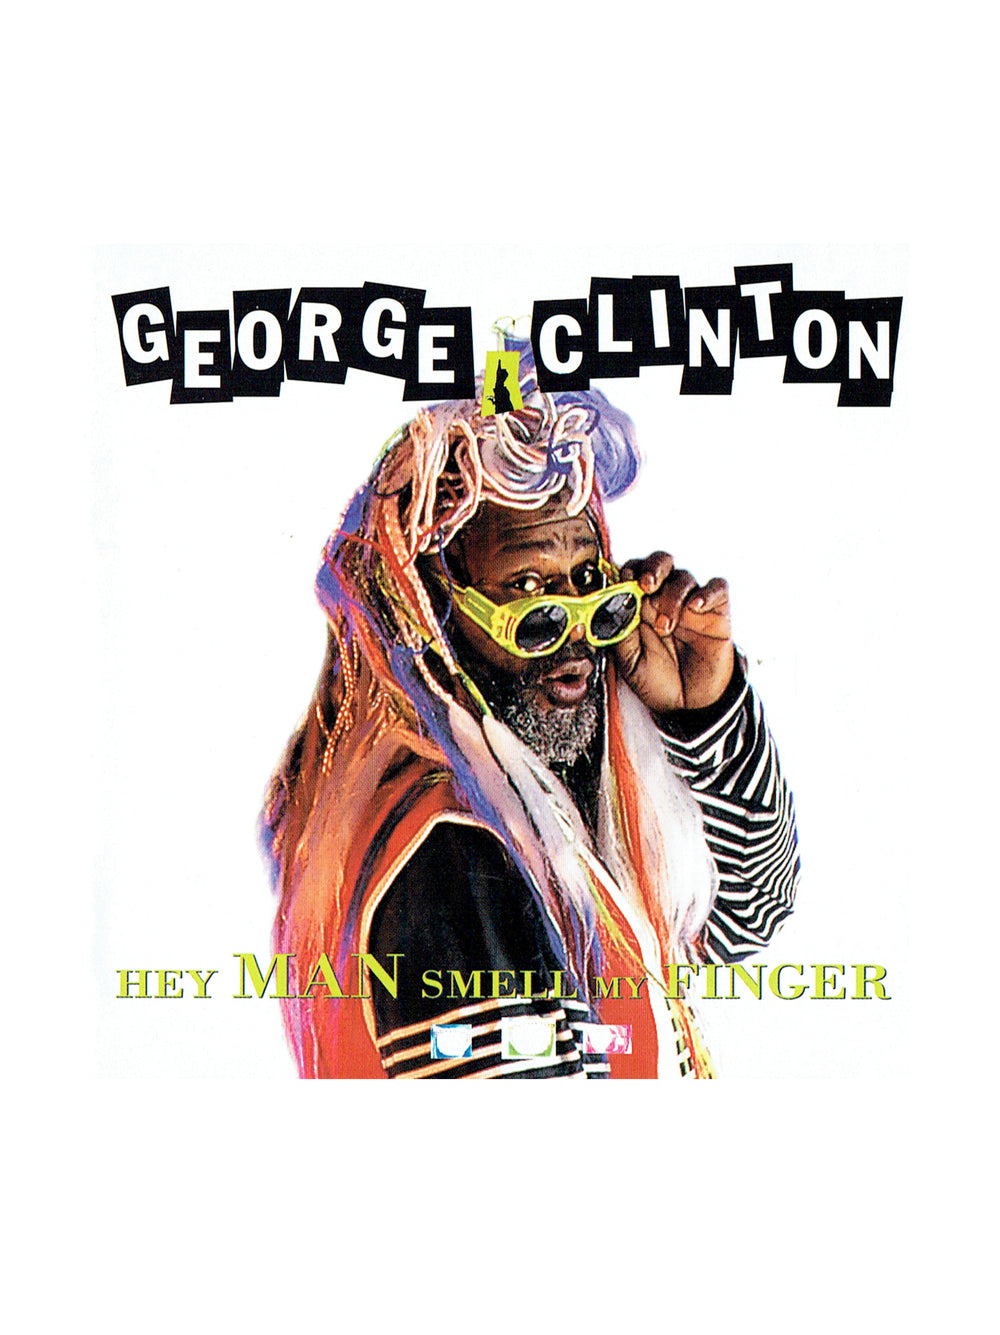 George Clinton Hey Man Smell My Finger CD Album NPG Records 1995 Prince